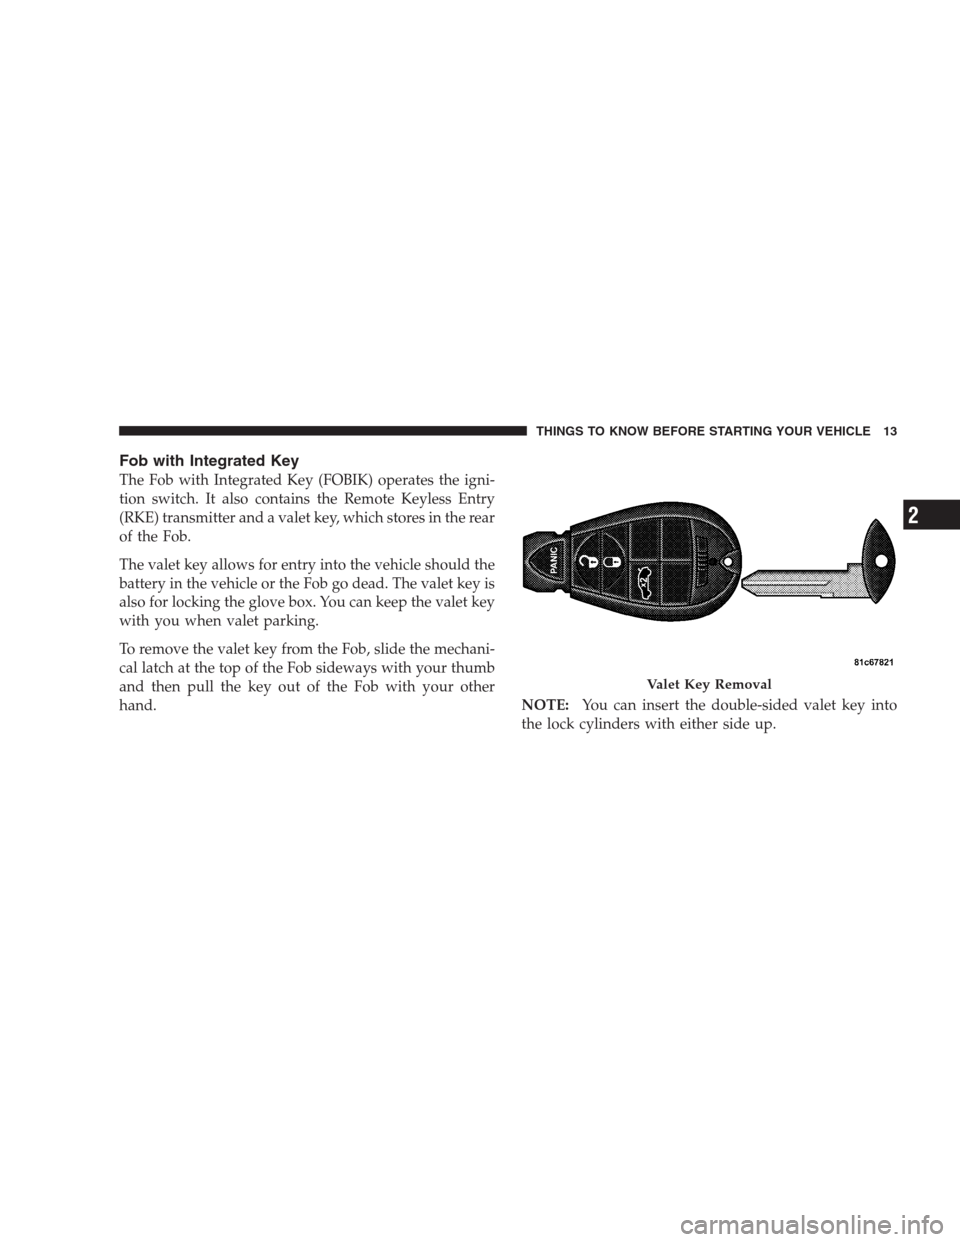 CHRYSLER 300 C 2009 1.G User Guide Fob with Integrated Key
The Fob with Integrated Key (FOBIK) operates the igni-
tion switch. It also contains the Remote Keyless Entry
(RKE) transmitter and a valet key, which stores in the rear
of the